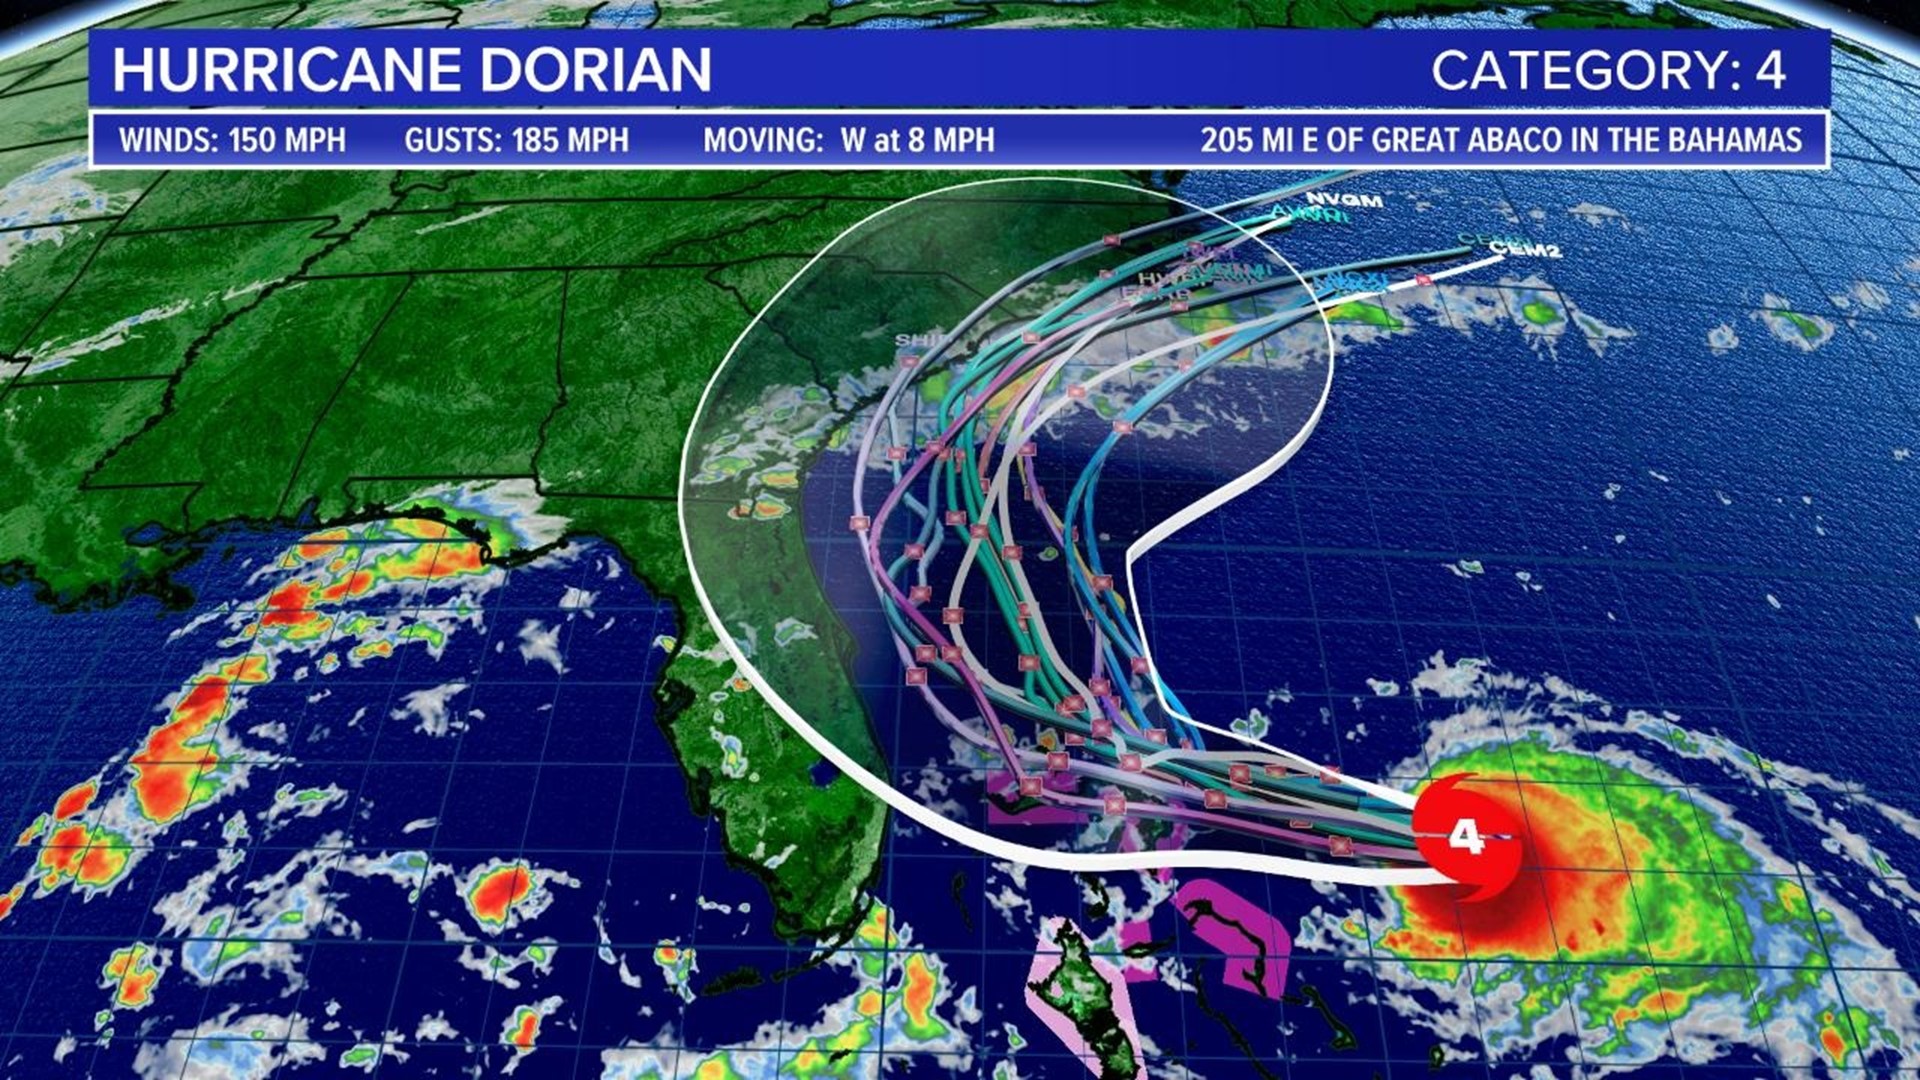 Hurricane Dorian remains an extremely dangerous hurricane. The storm is currently forecast to move near Florida, then track north, eventually moving near the coast of the Carolinas.